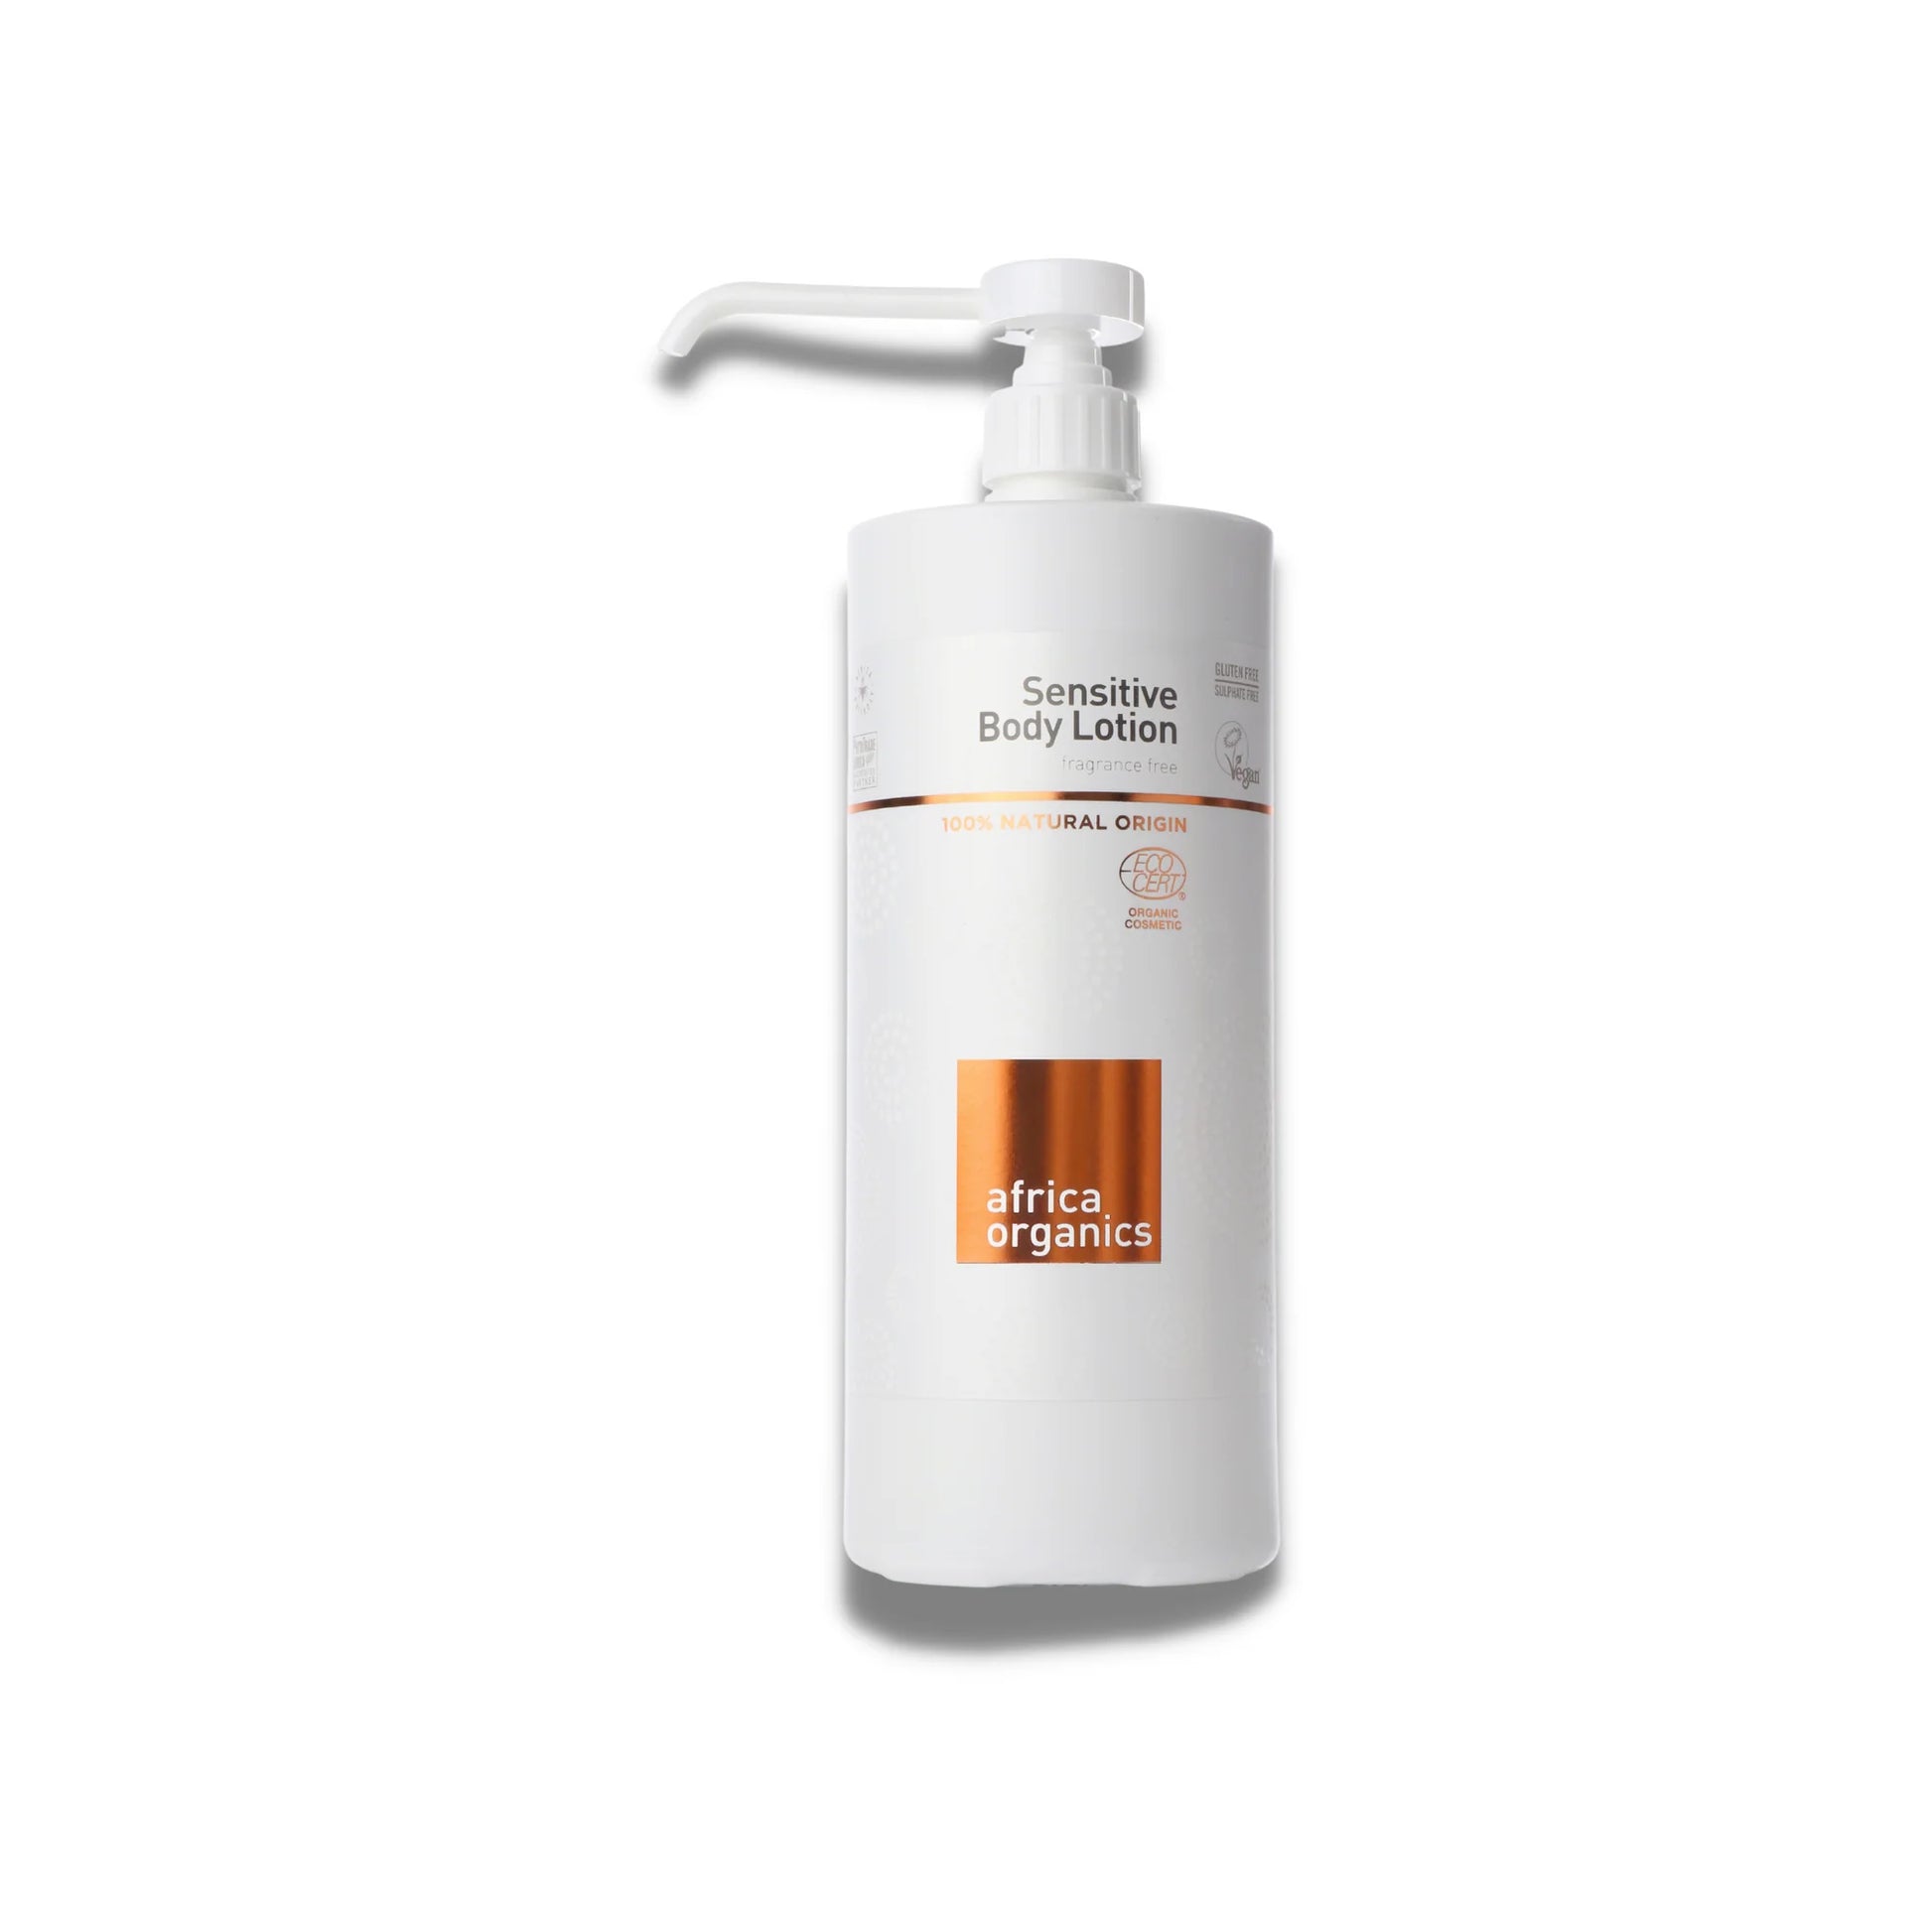 Sensitive Body Lotion- Gentle, pH balanced wash and calming lotion for sensitive skin.